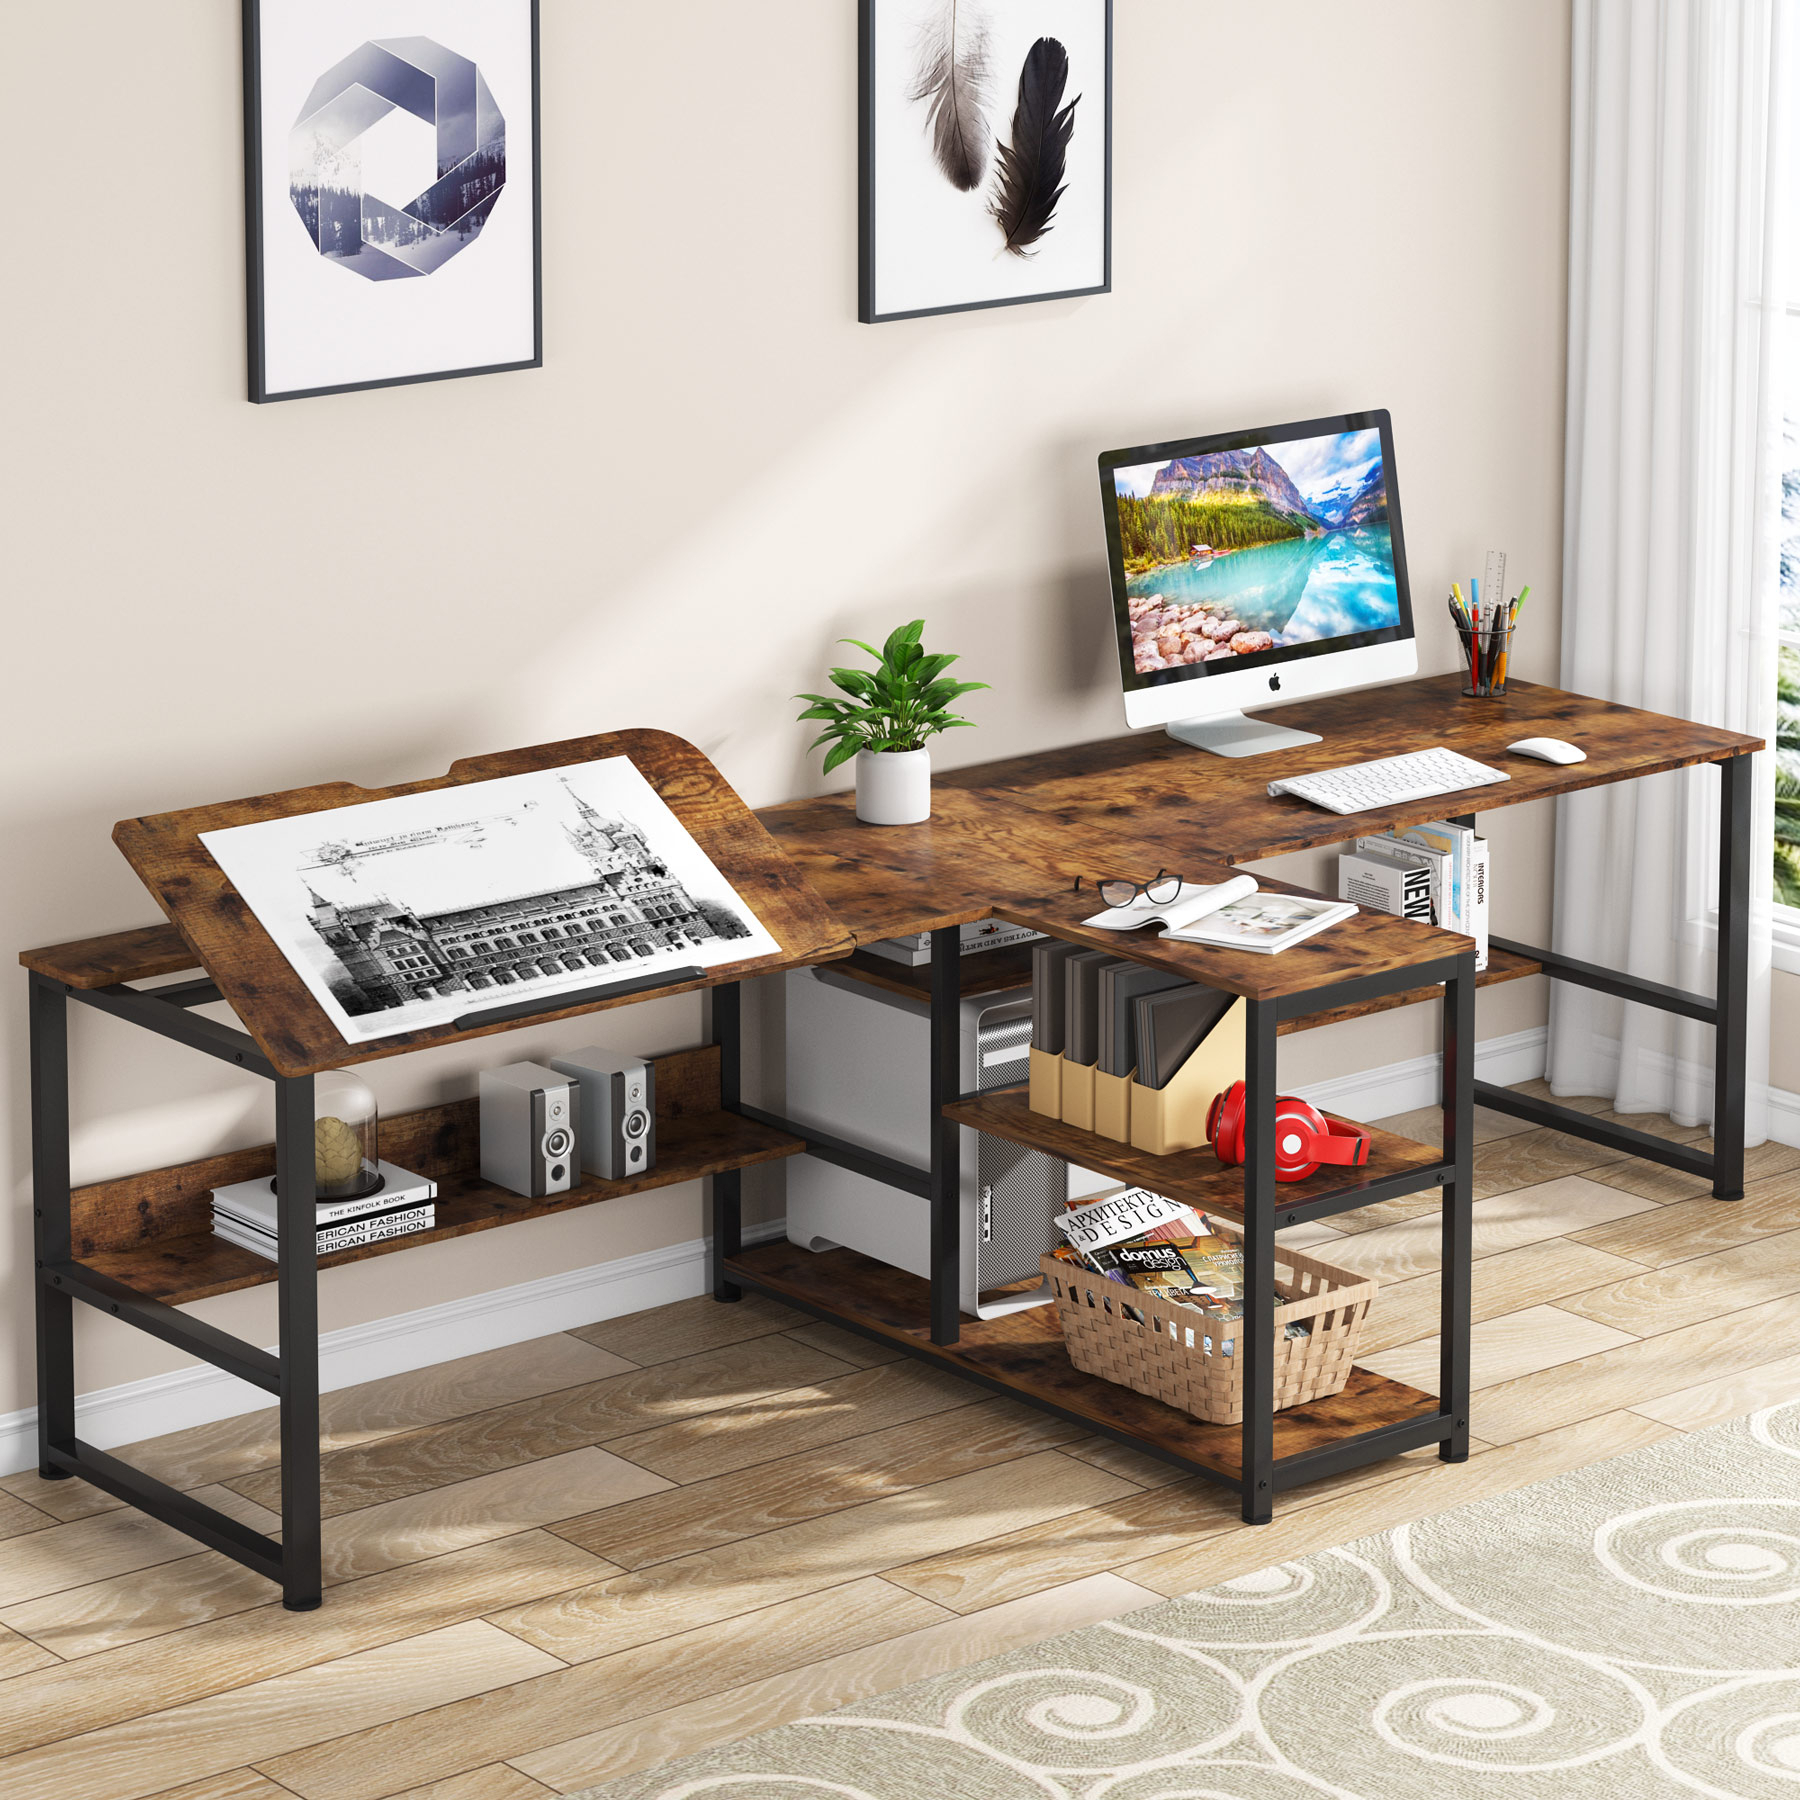 Tribesigns 94.5 inch Two Person Desk with Storage Shelves and Tiltable Tabletop, Double Computer Desk with Printer Shelf